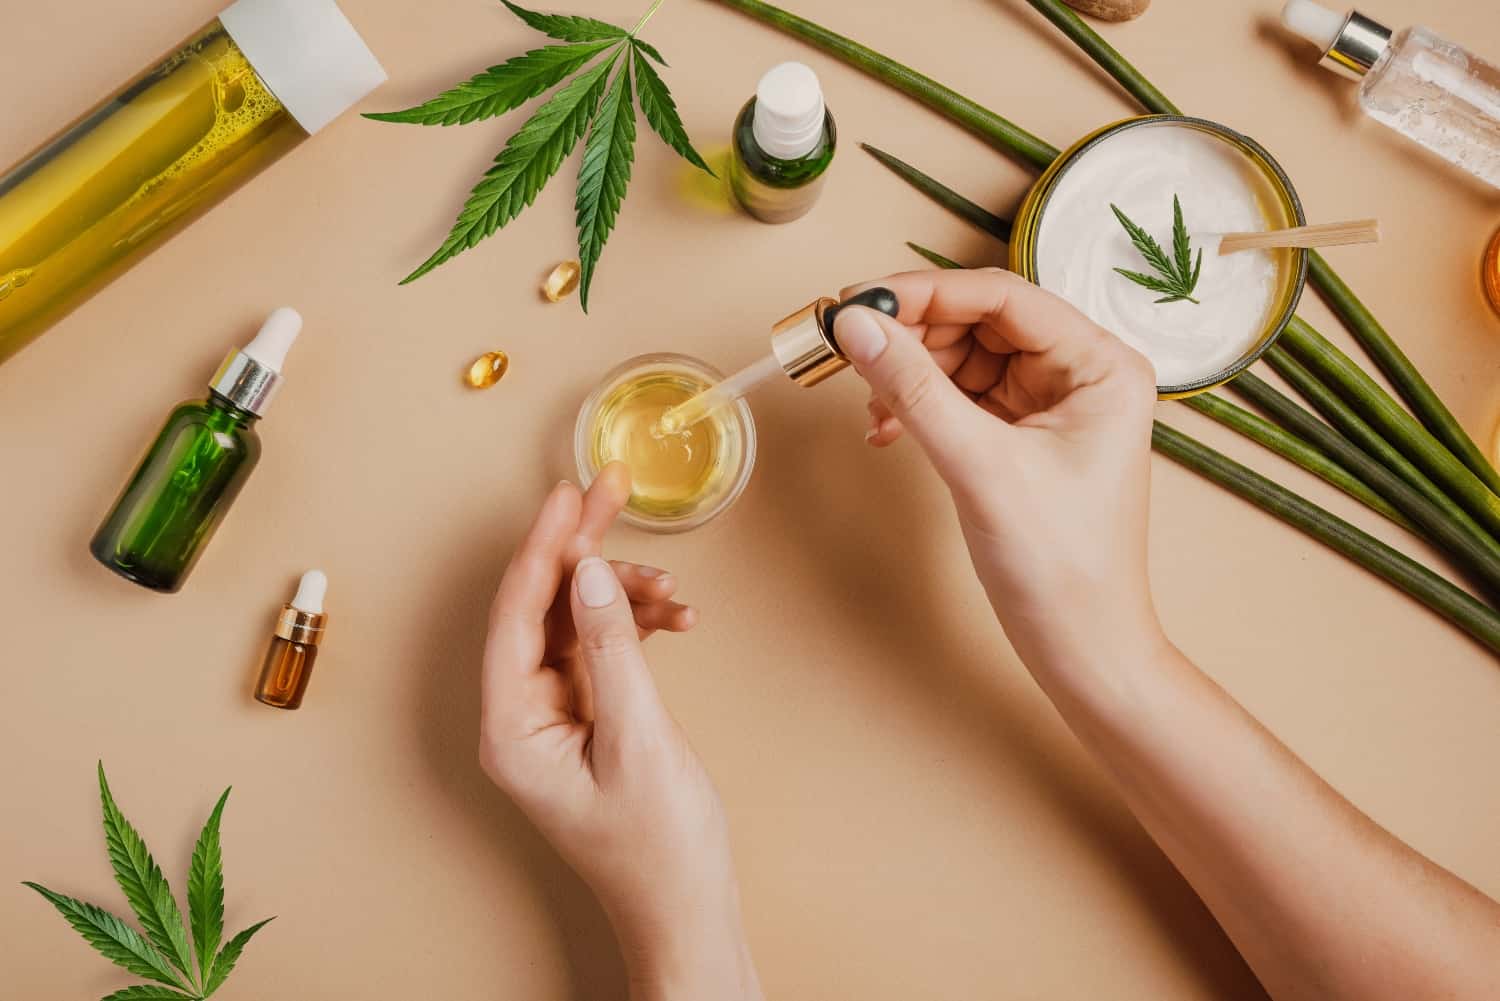 10 CBD Products to Spark Your Interest on 4/20